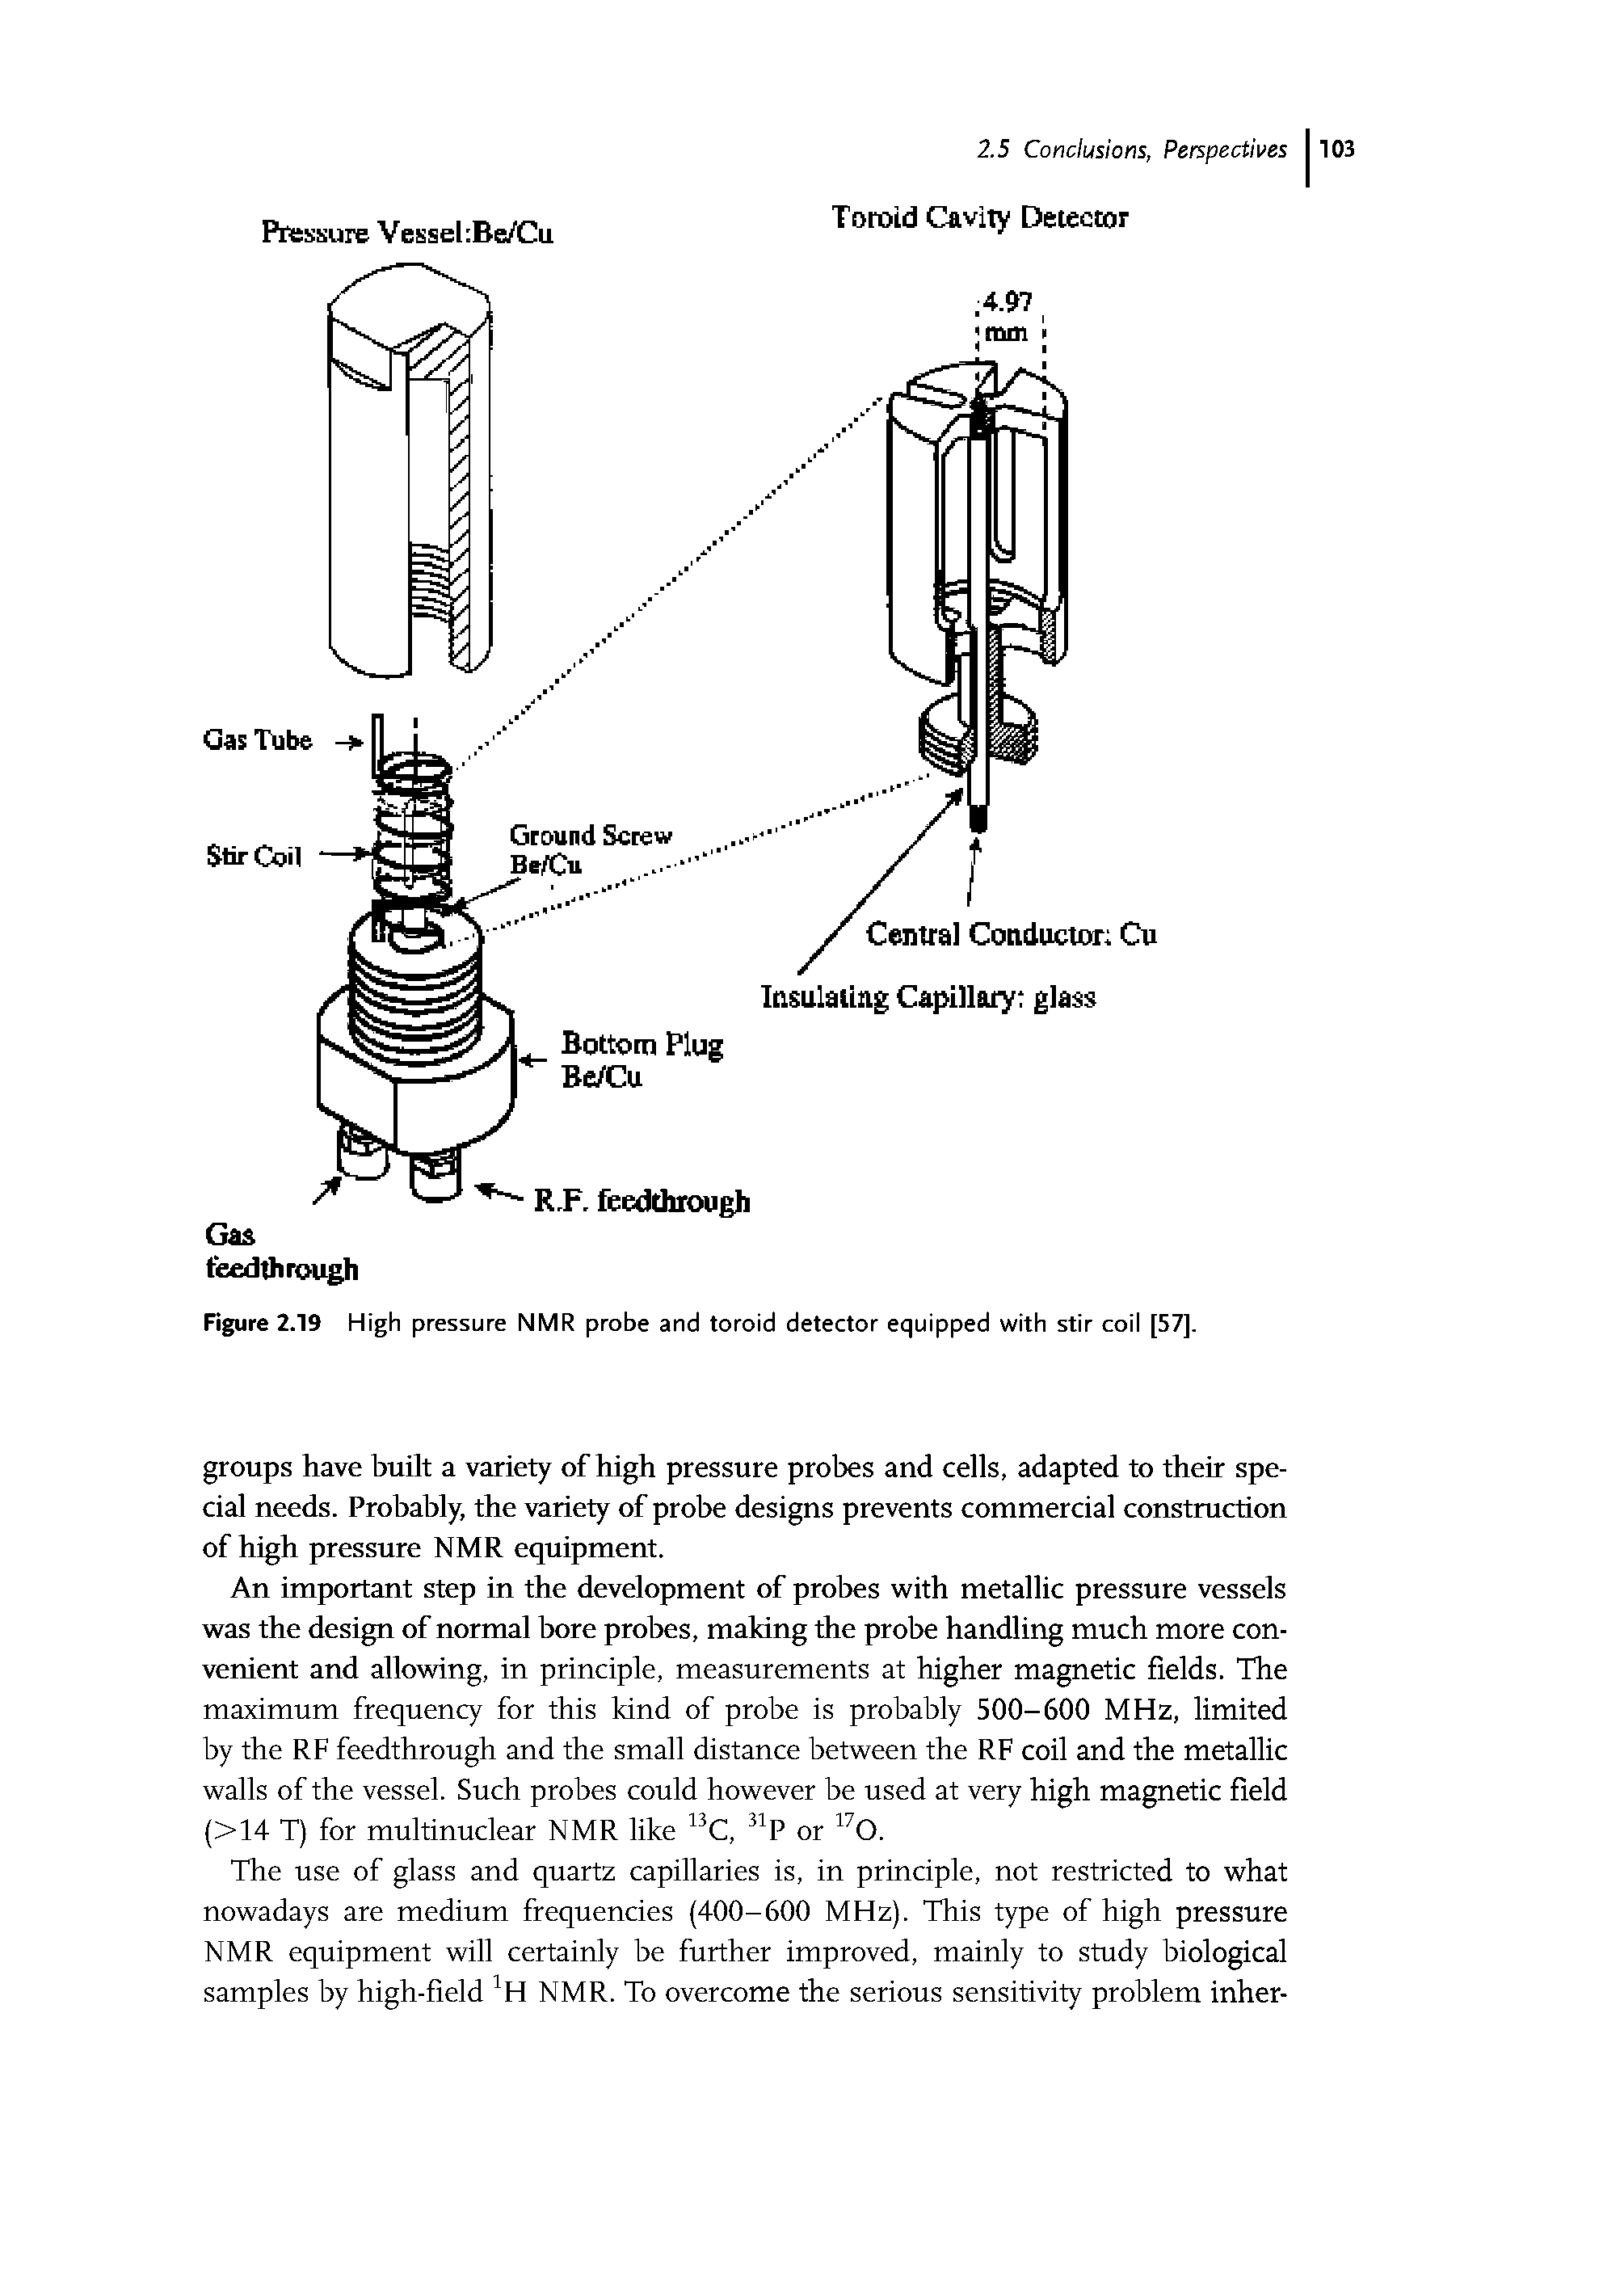 Figure 2.19 High pressure NMR probe and toroid detector equipped with stir coii [57].